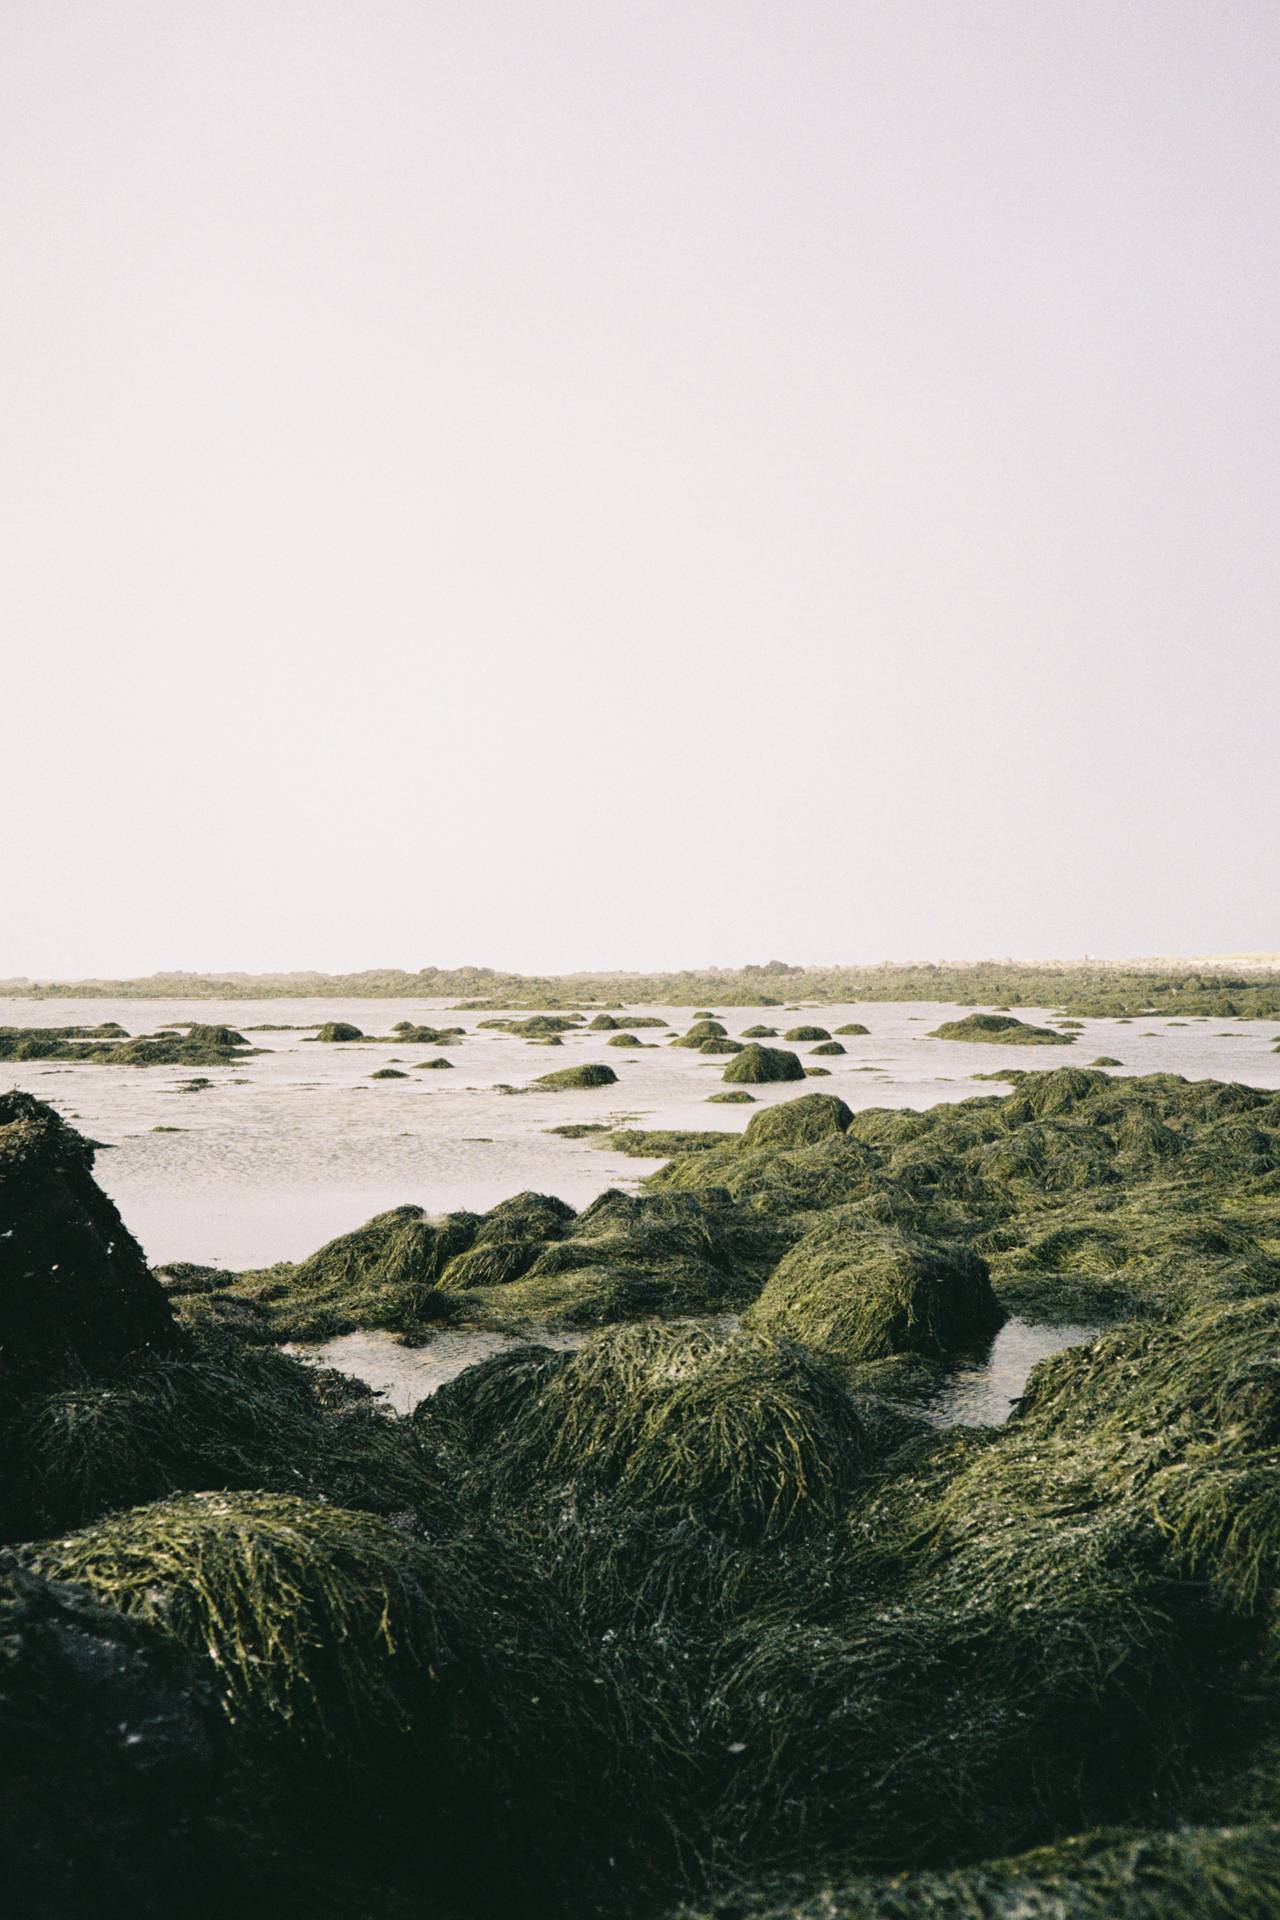 A photograph of seaweed covered rocks by the sea